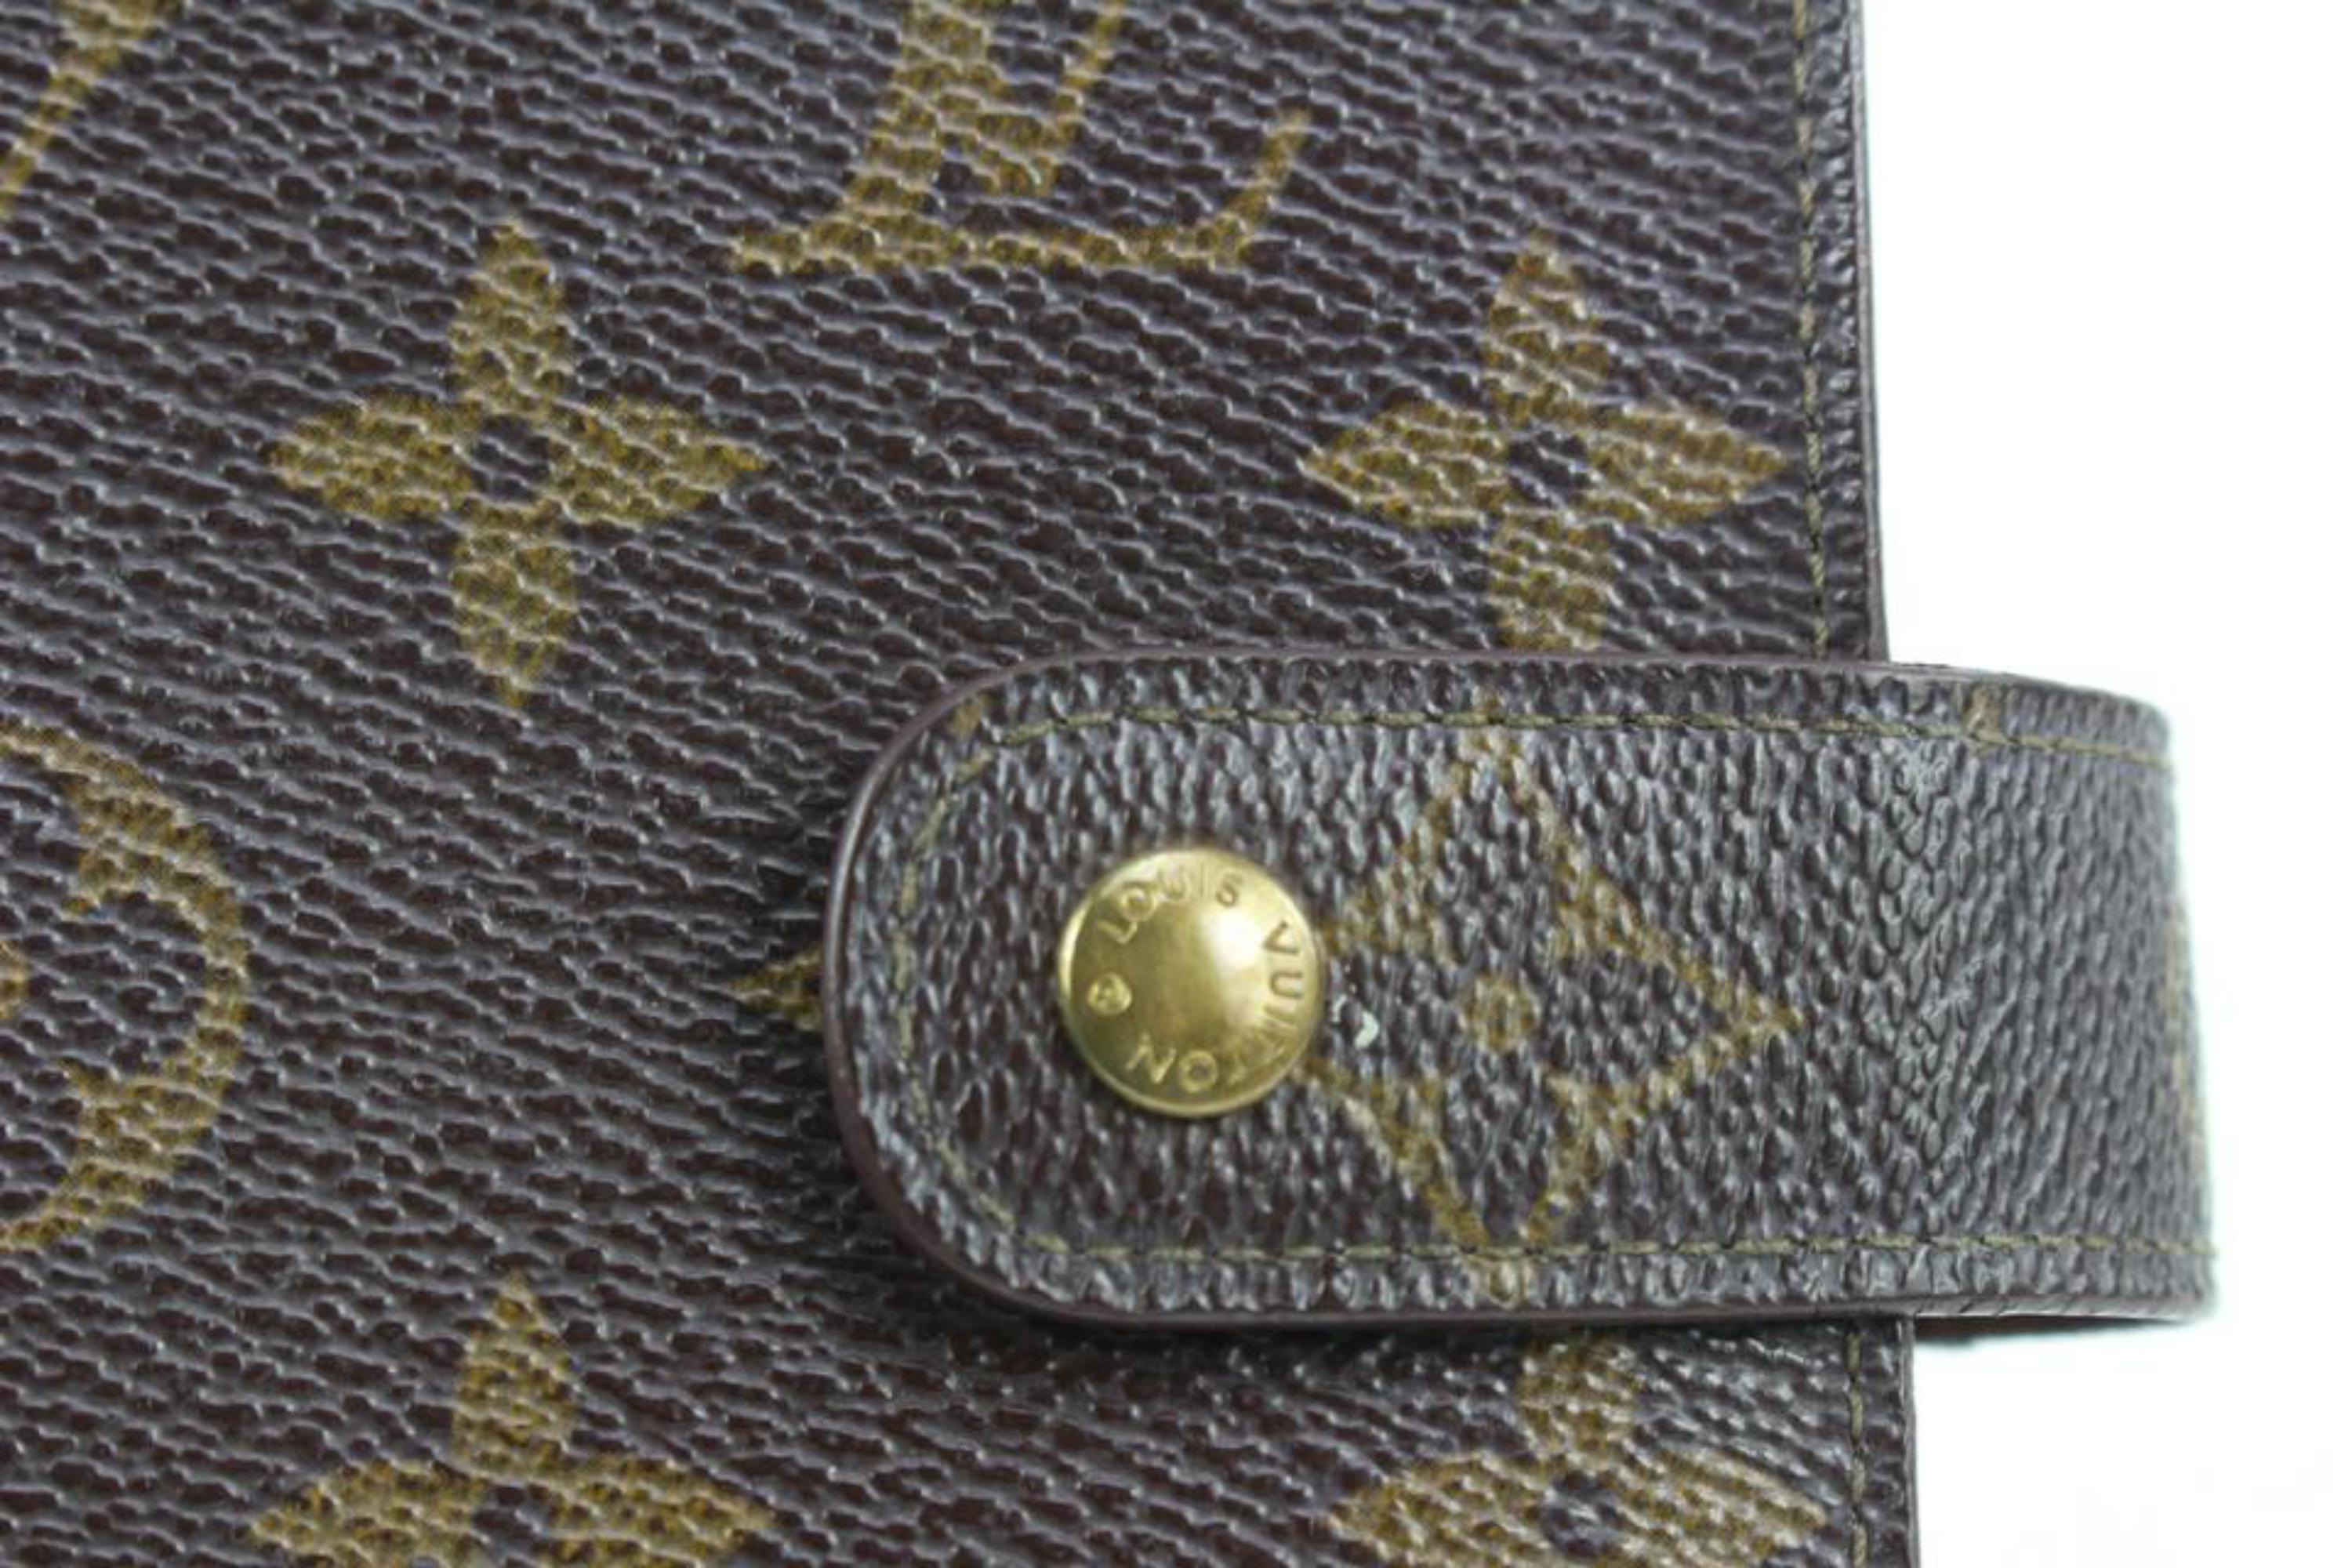 Louis Vuitton Monogram Agenda MM Diary Planner Cover s28lv14 In Good Condition For Sale In Dix hills, NY